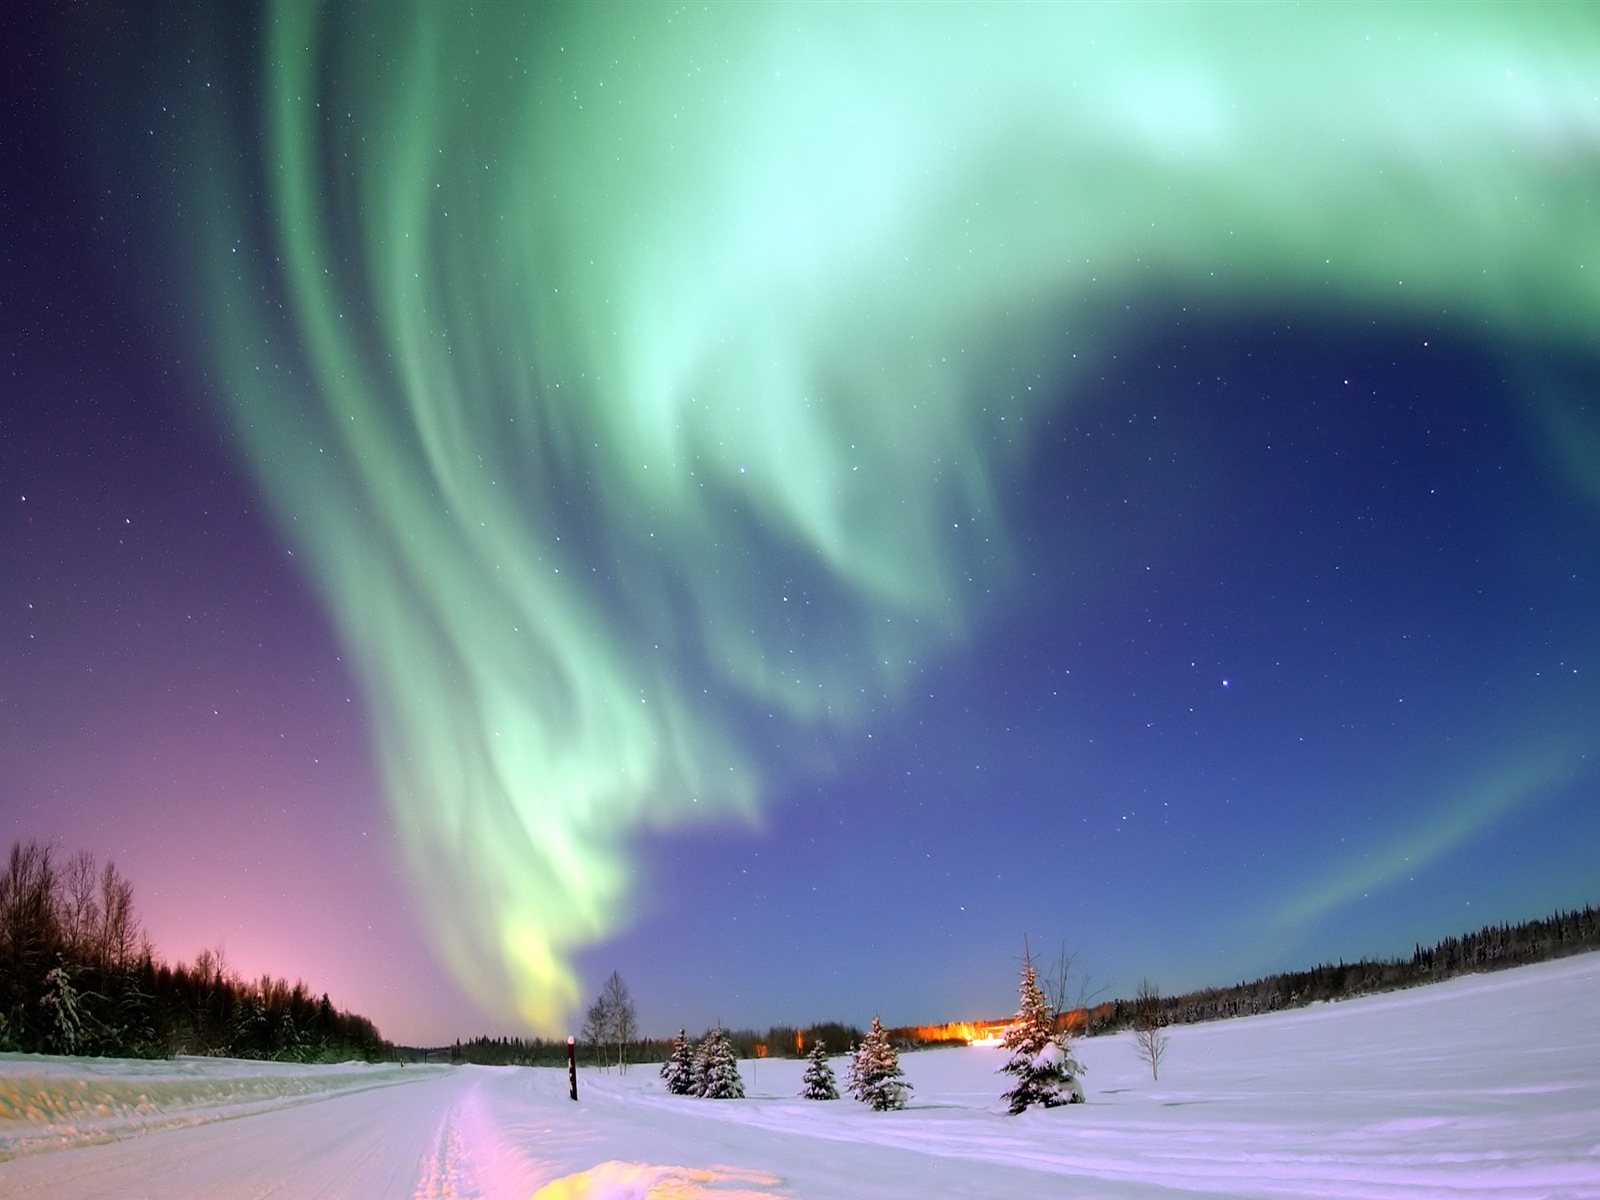 Natural wonders of the Northern Lights HD Wallpaper (2) #22 - 1600x1200